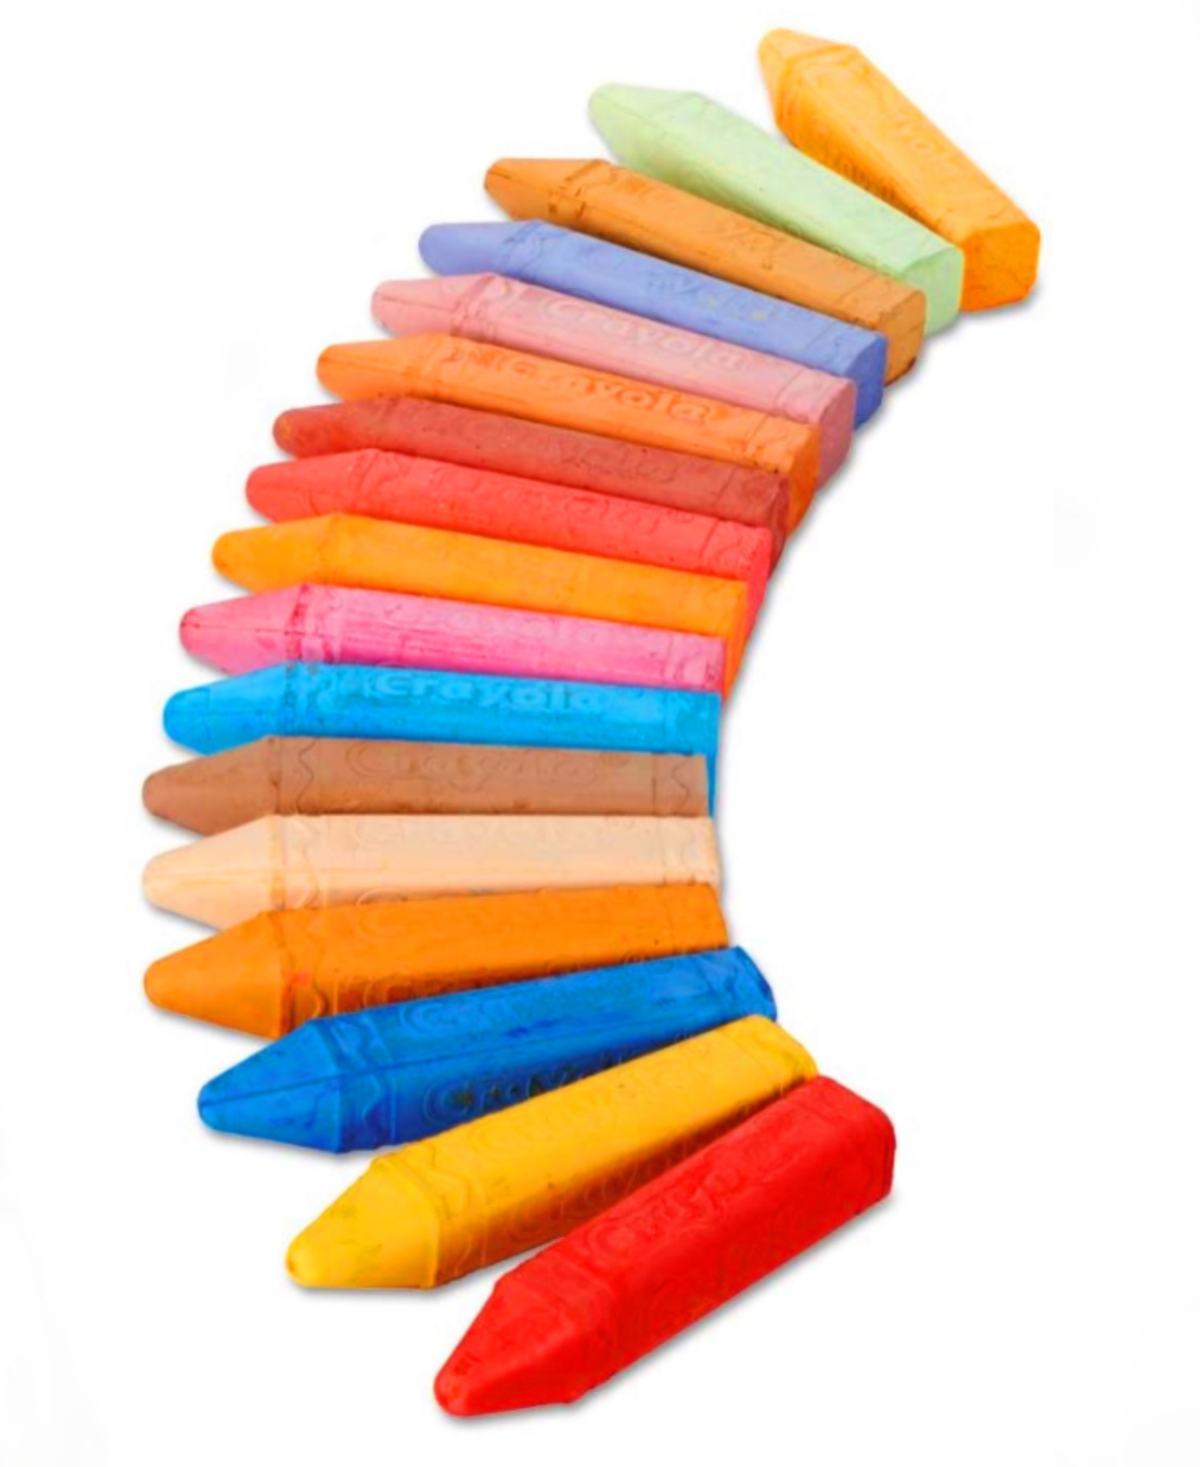 Shop Crayola Mess Free Sidewalk Chalk In Various Colors For Outdoor Sidewalk Playtime In Multi Colored Plastic